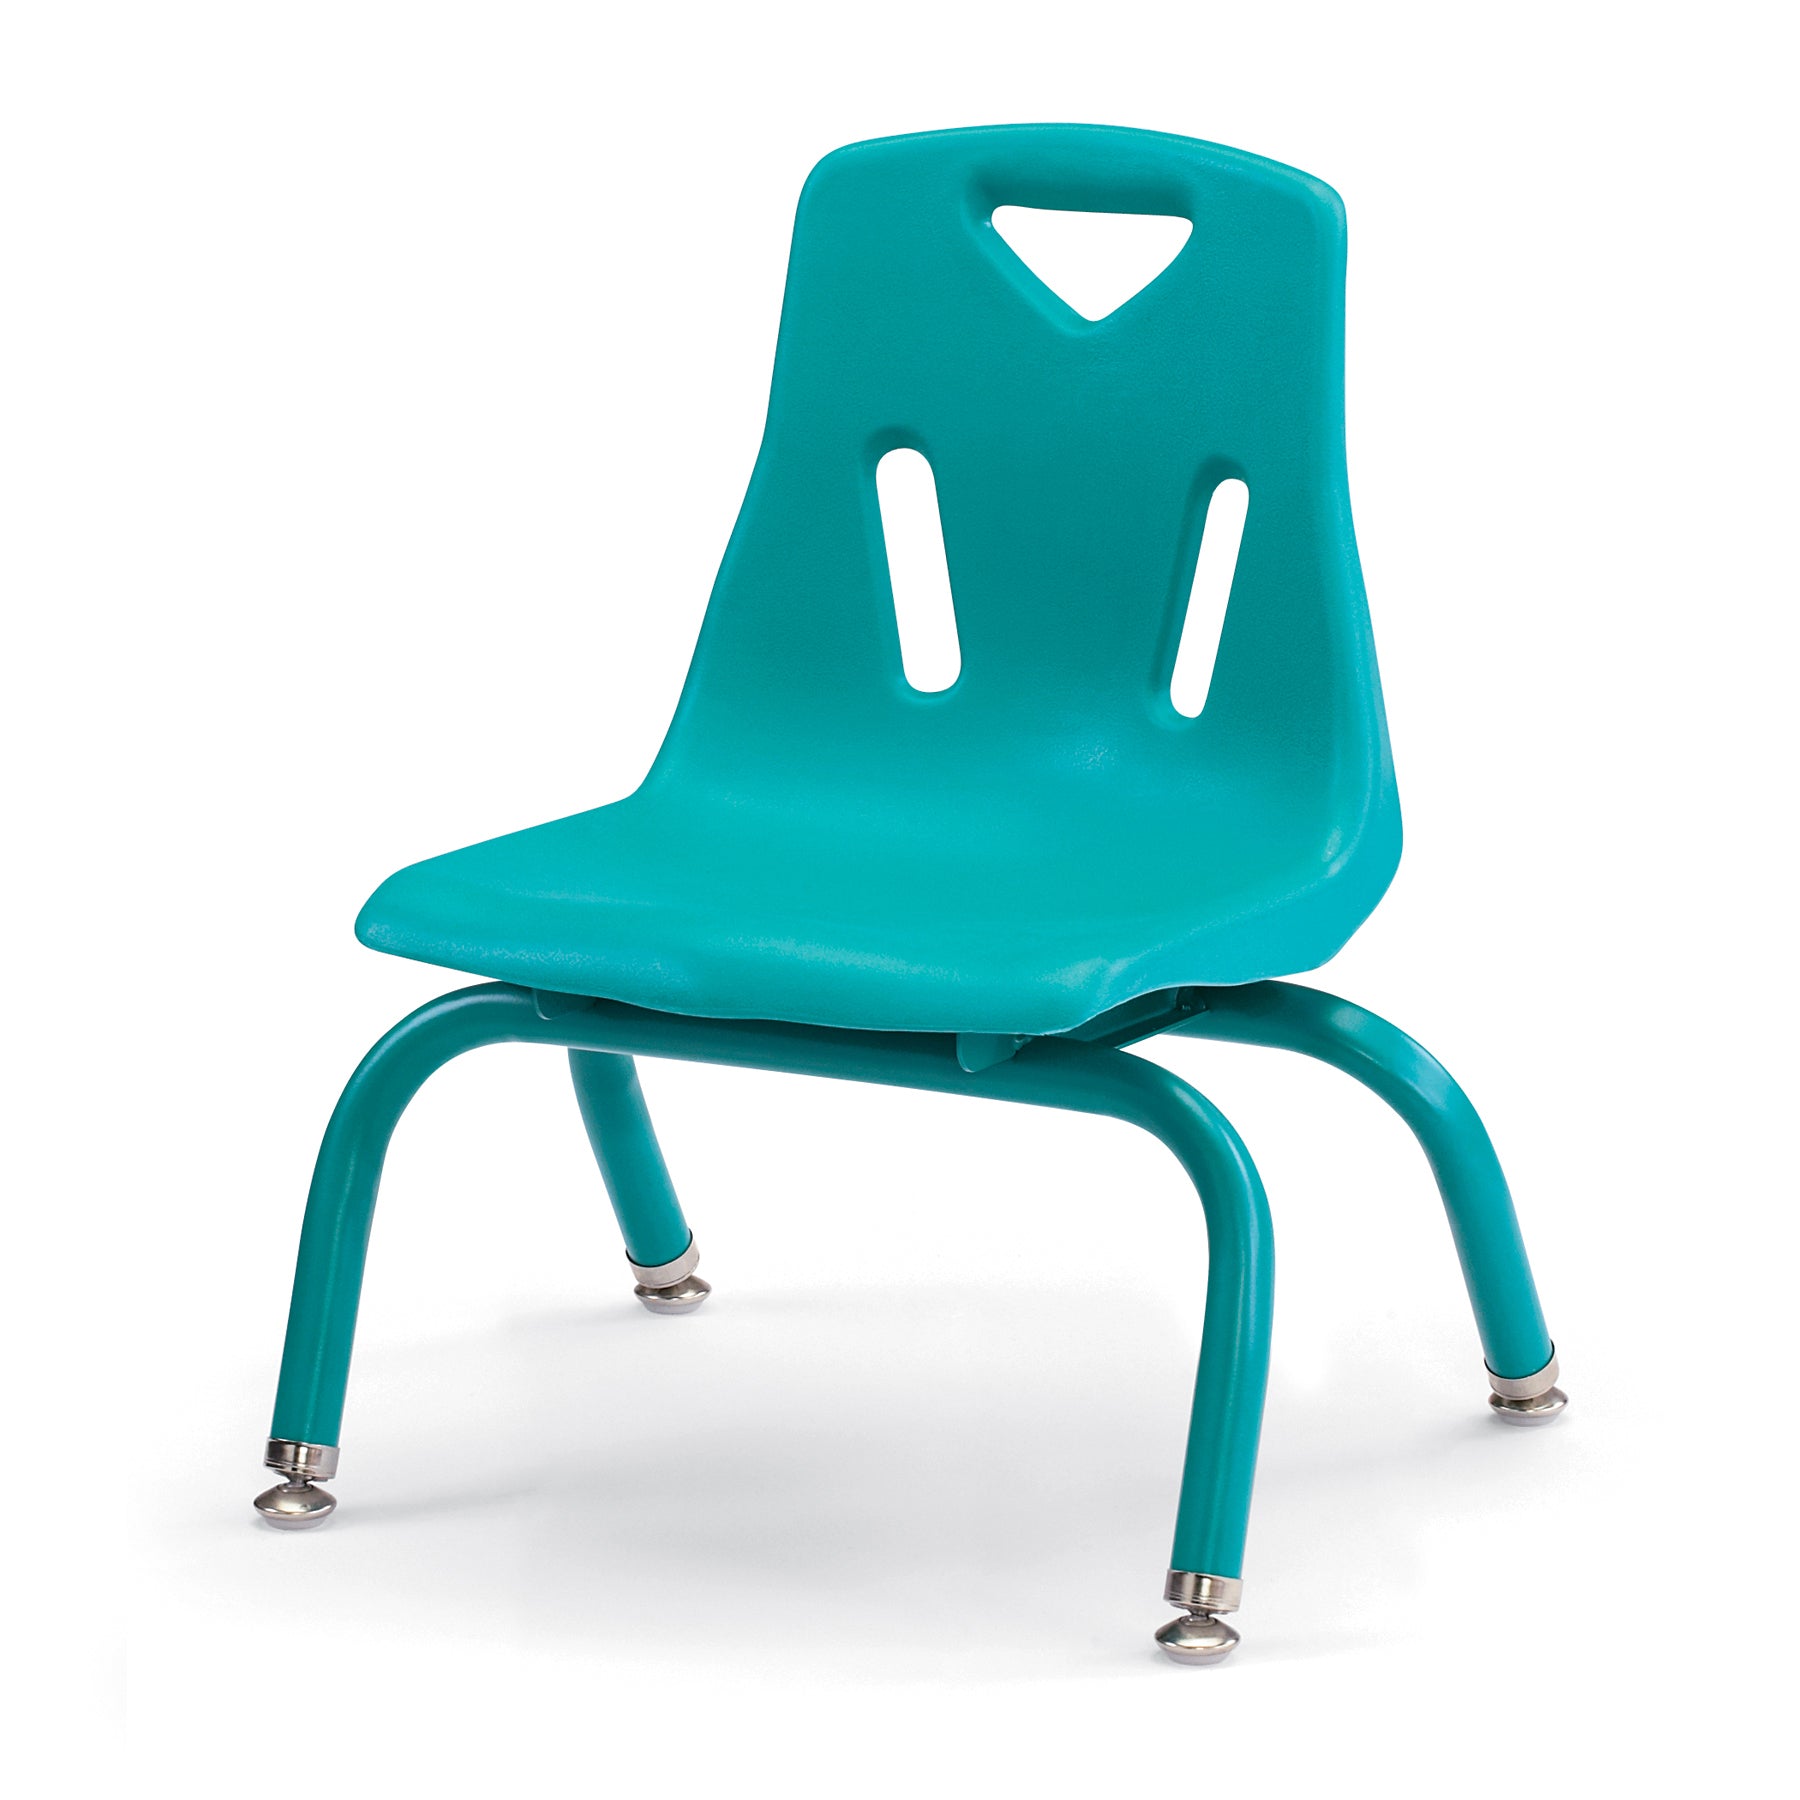 8118JC1005, Berries Stacking Chair with Powder-Coated Legs - 8" Ht - Teal